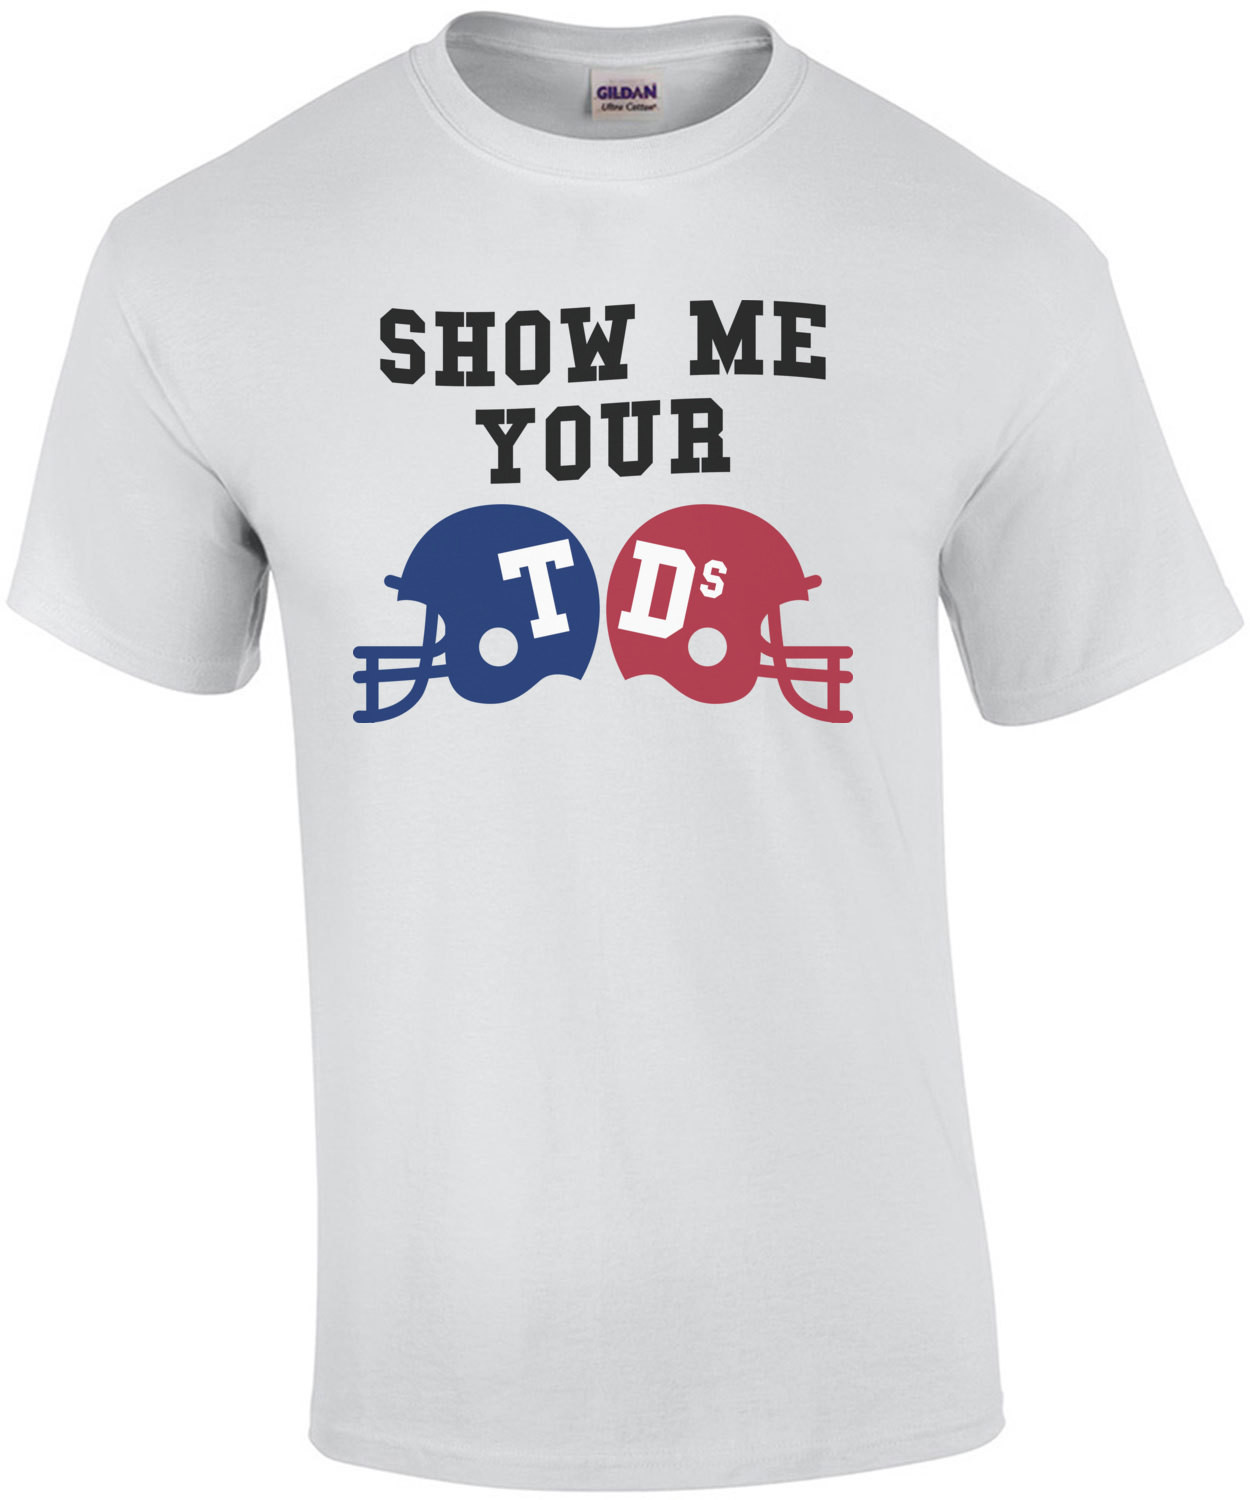 Show Me Your TDs Funny Footbal Shirt